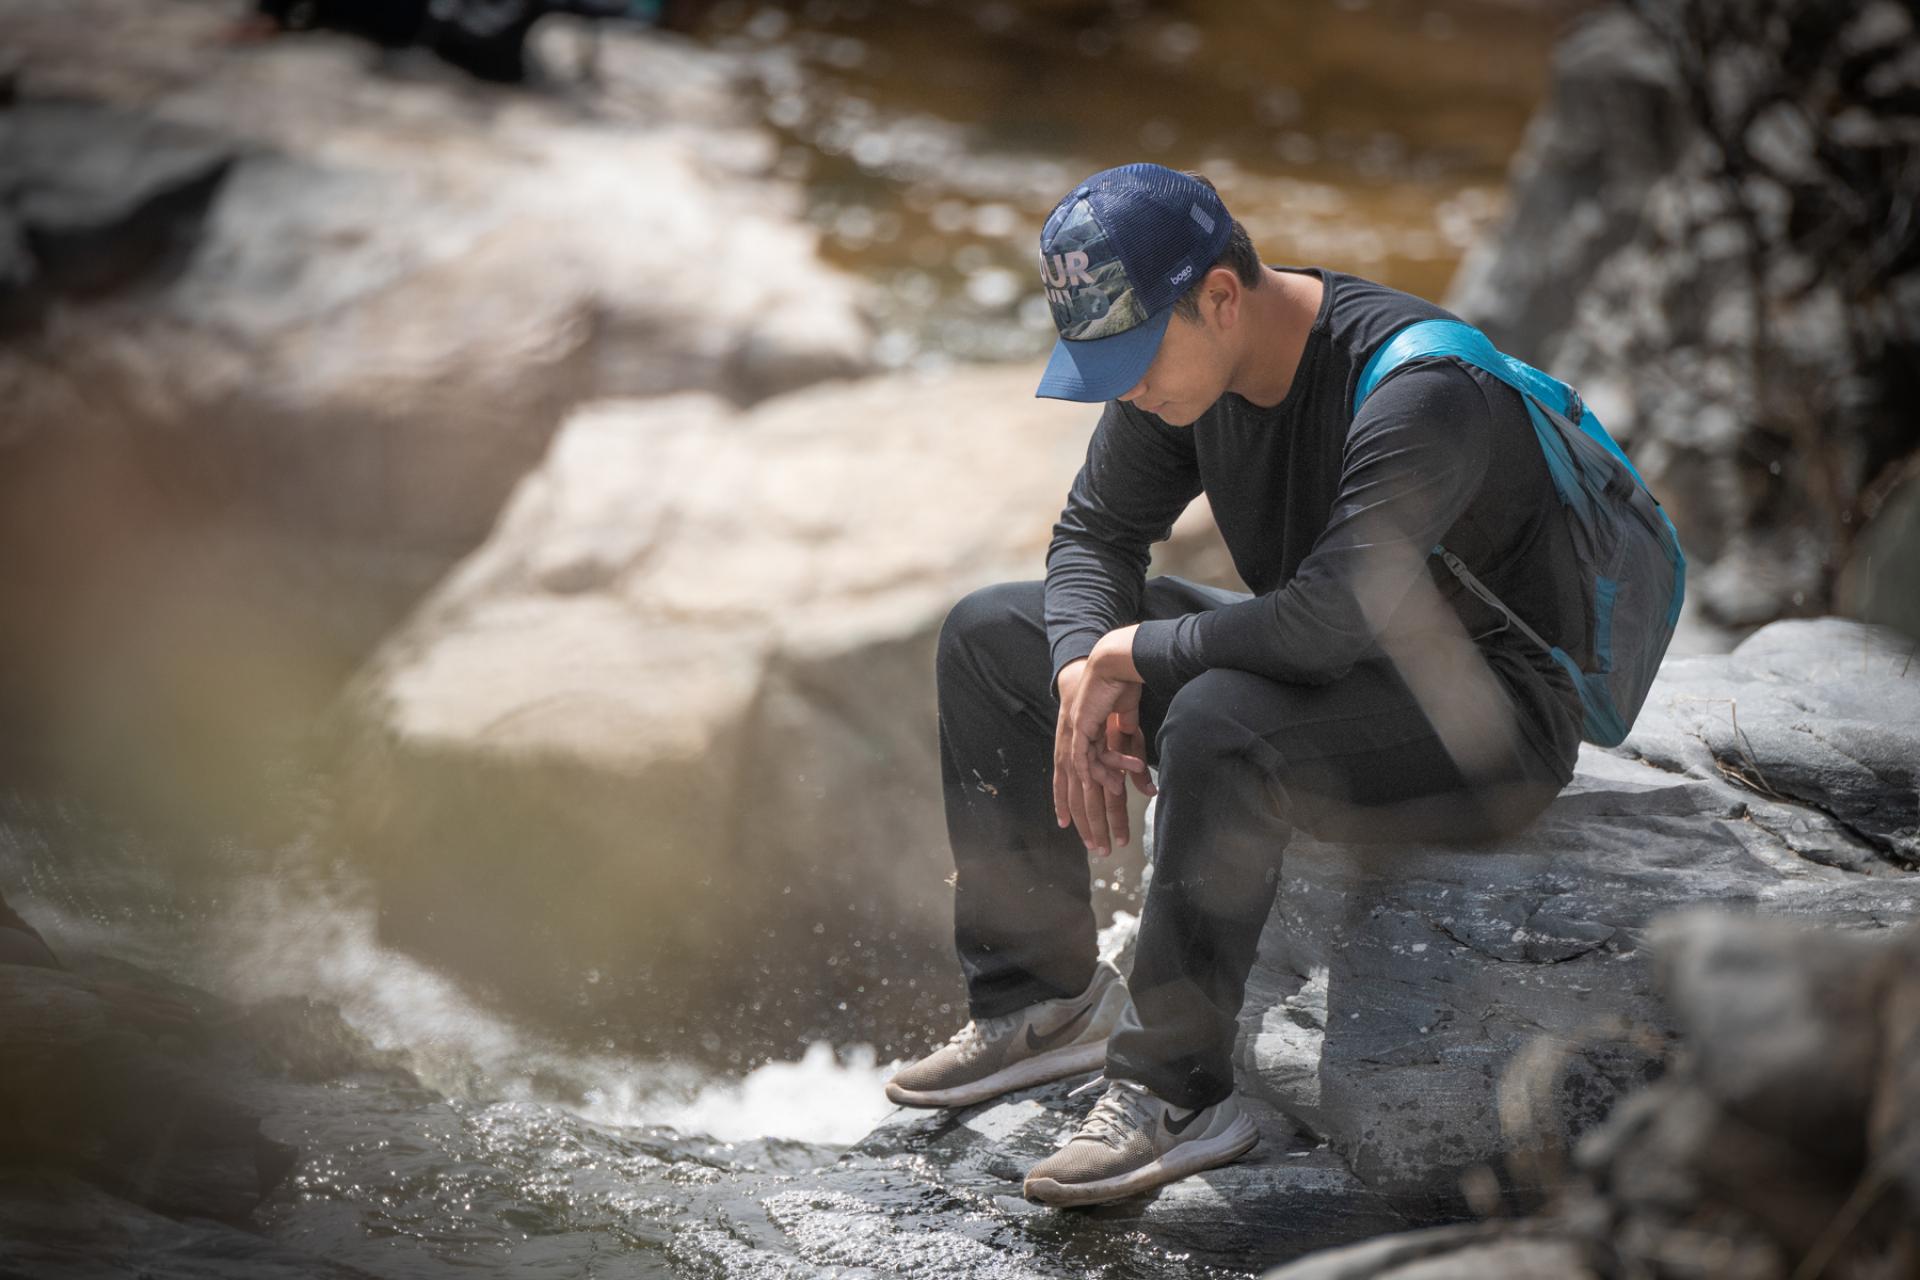 Person seated on rock next to creek, looking down thoughtfully with baseball cap on head and rocks in background